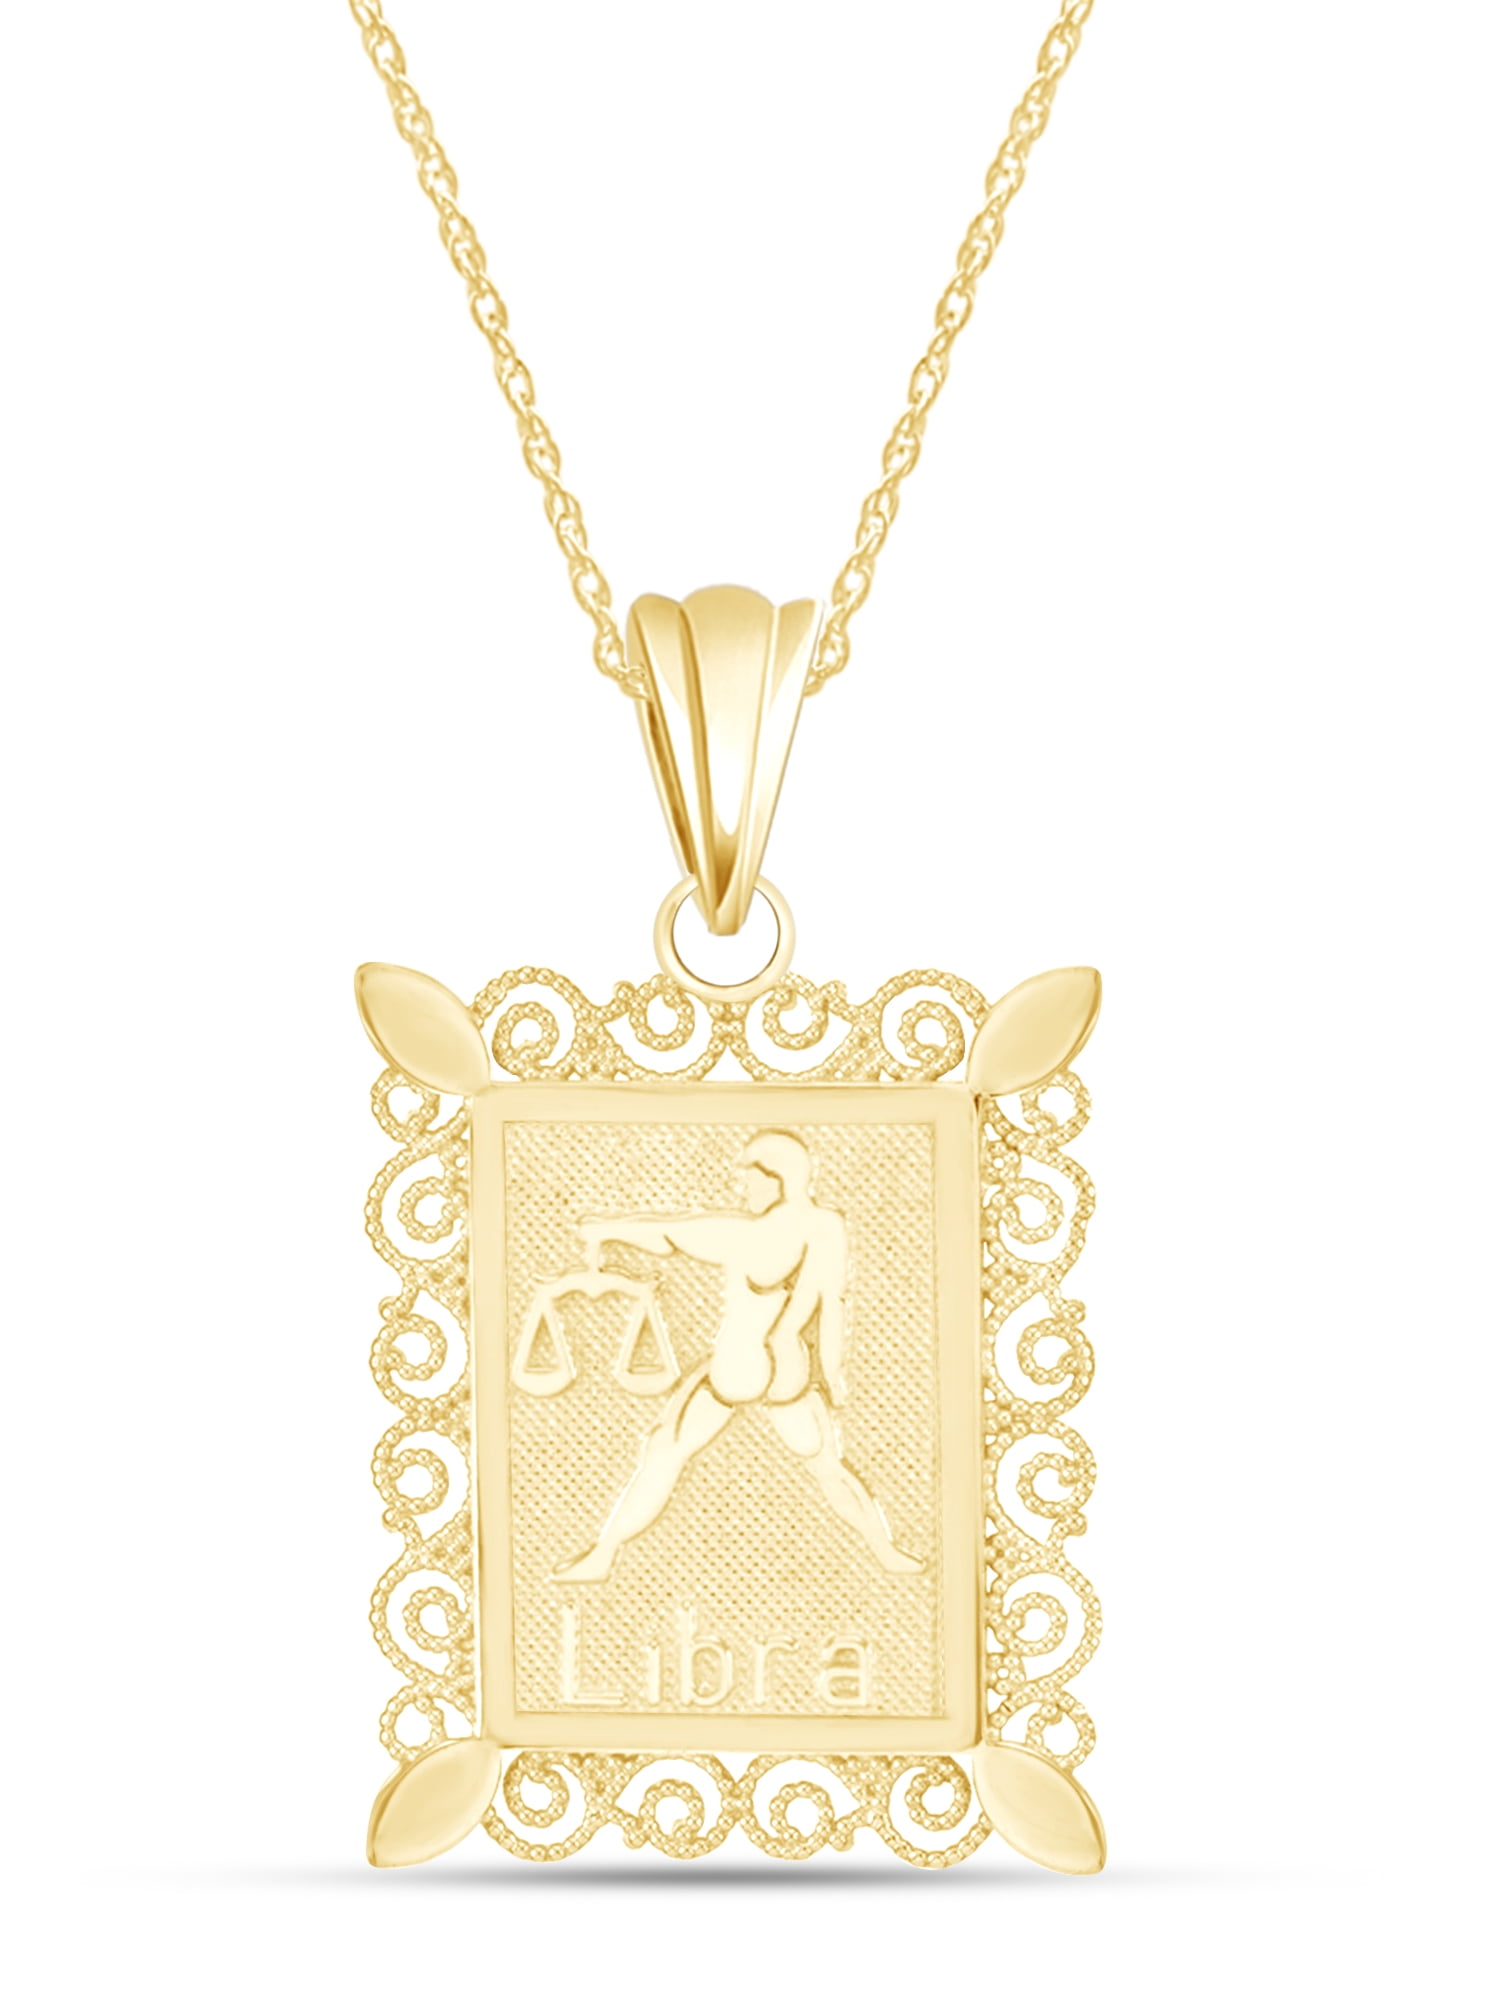 AFFY Hummingbird Pendant Necklace in 14k Gold Over Sterling Silver 